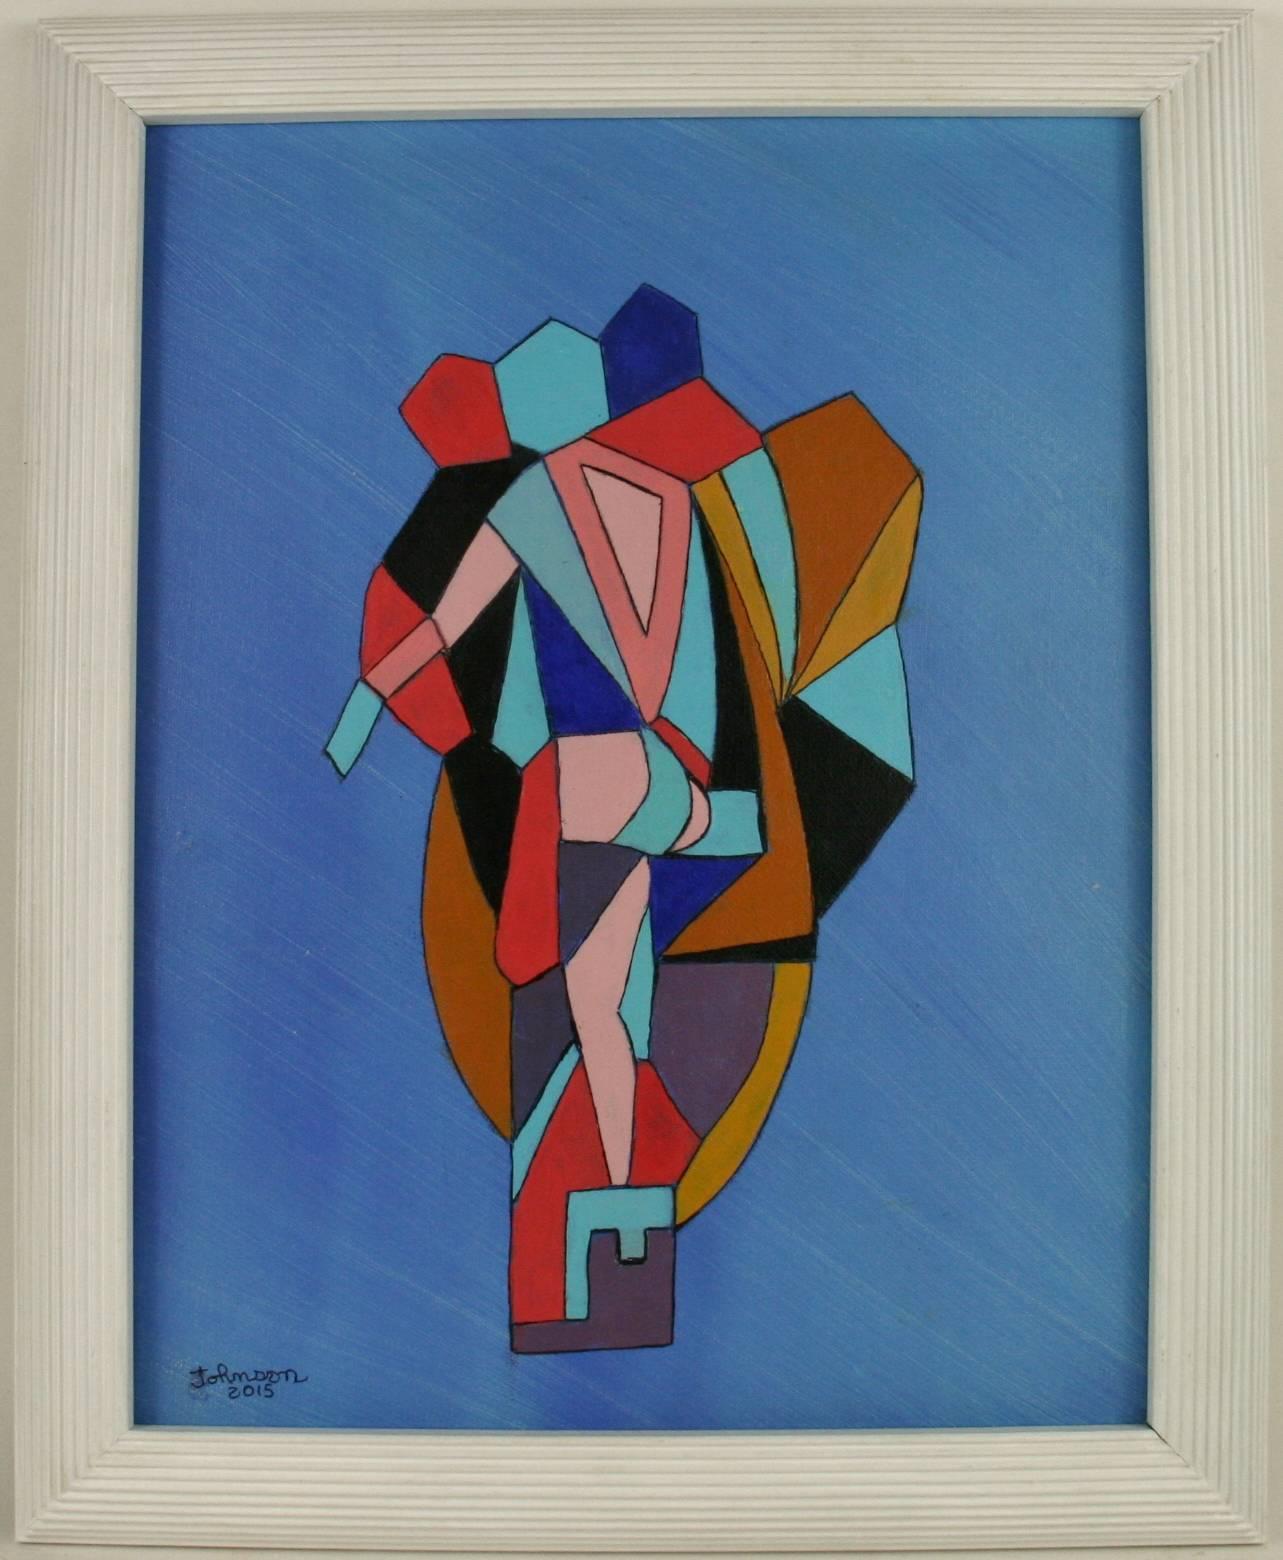 #5-2933a   Cubic Figures, acrylic on artist board displayed in a white wood frame,signed lower left by Jhonson.Image size 17 H x 13.5